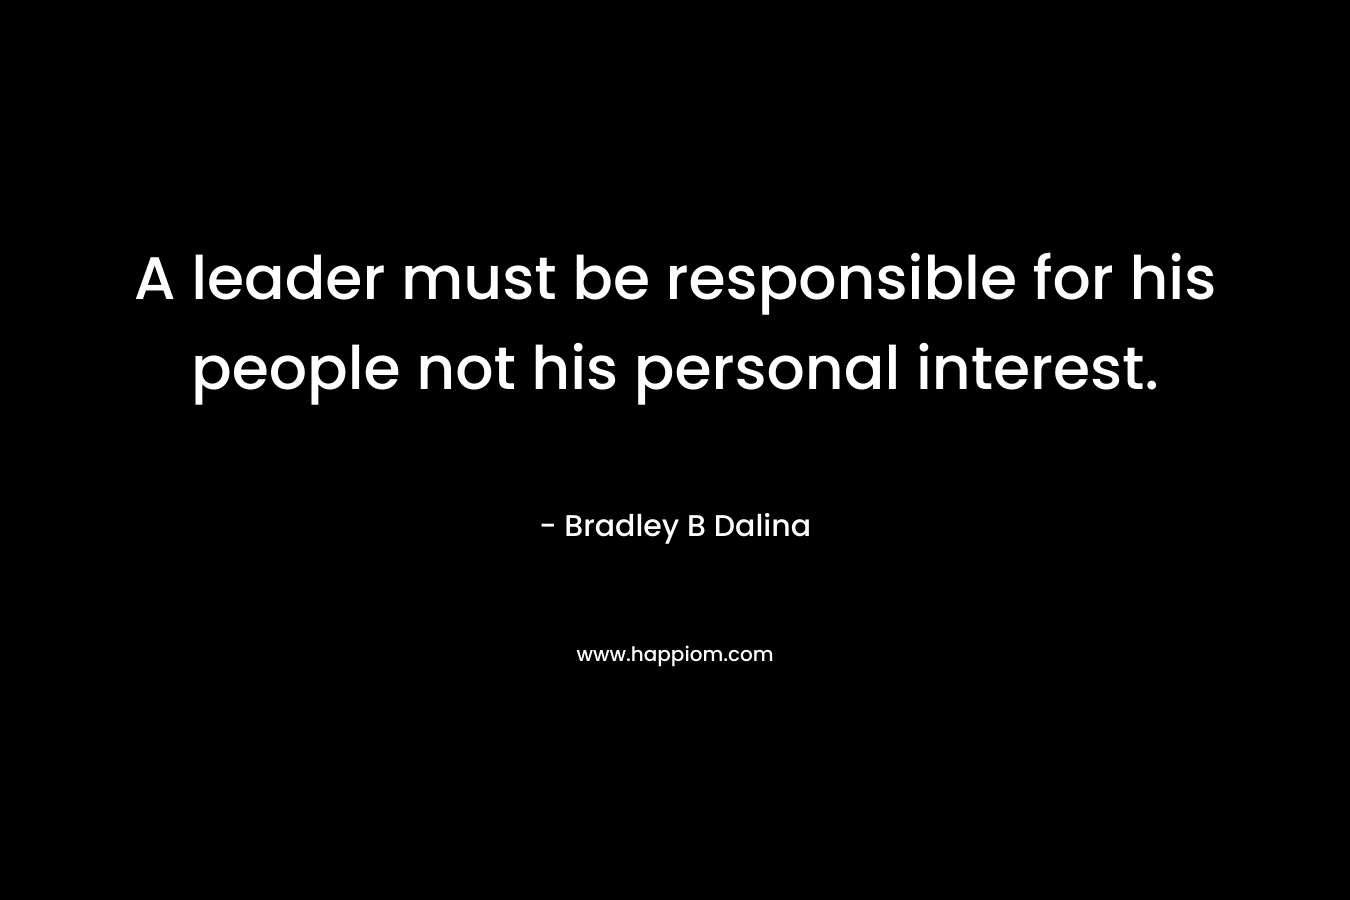 A leader must be responsible for his people not his personal interest. – Bradley B Dalina